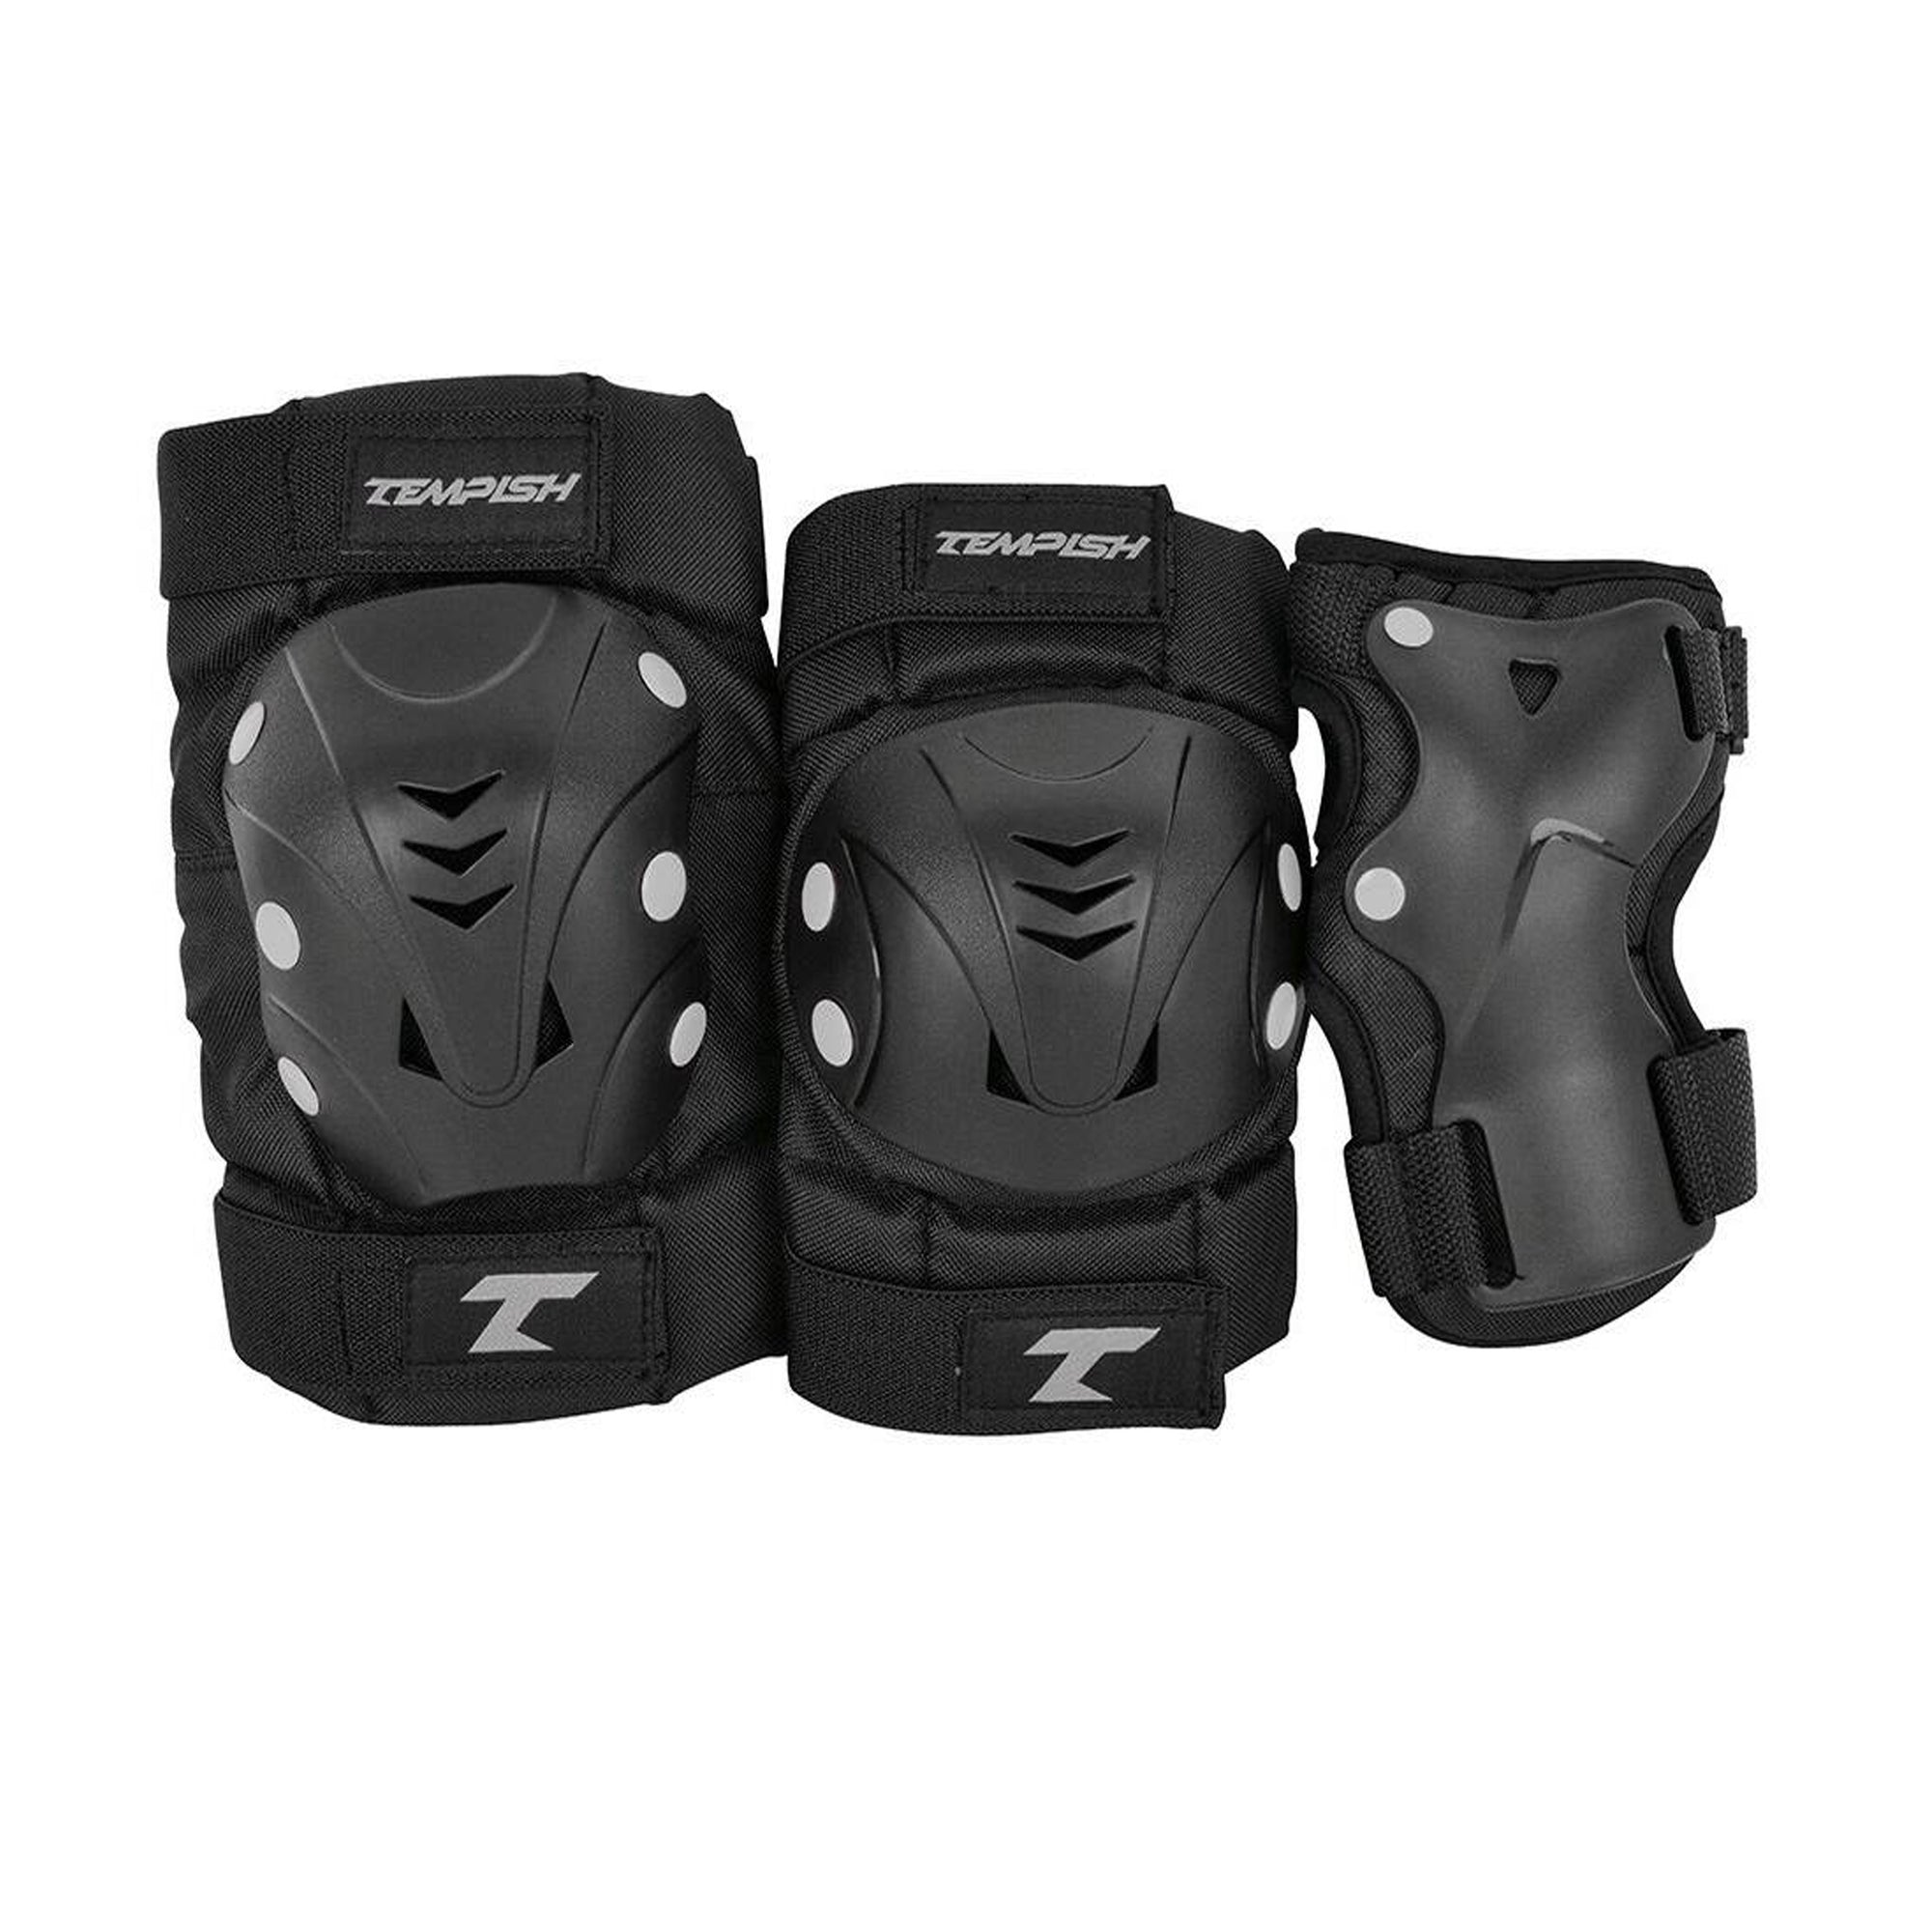 Tempish Taky Skate Pads 3-pack - Black/Grey - Roller Skates Parts and Accessories | JT Skate